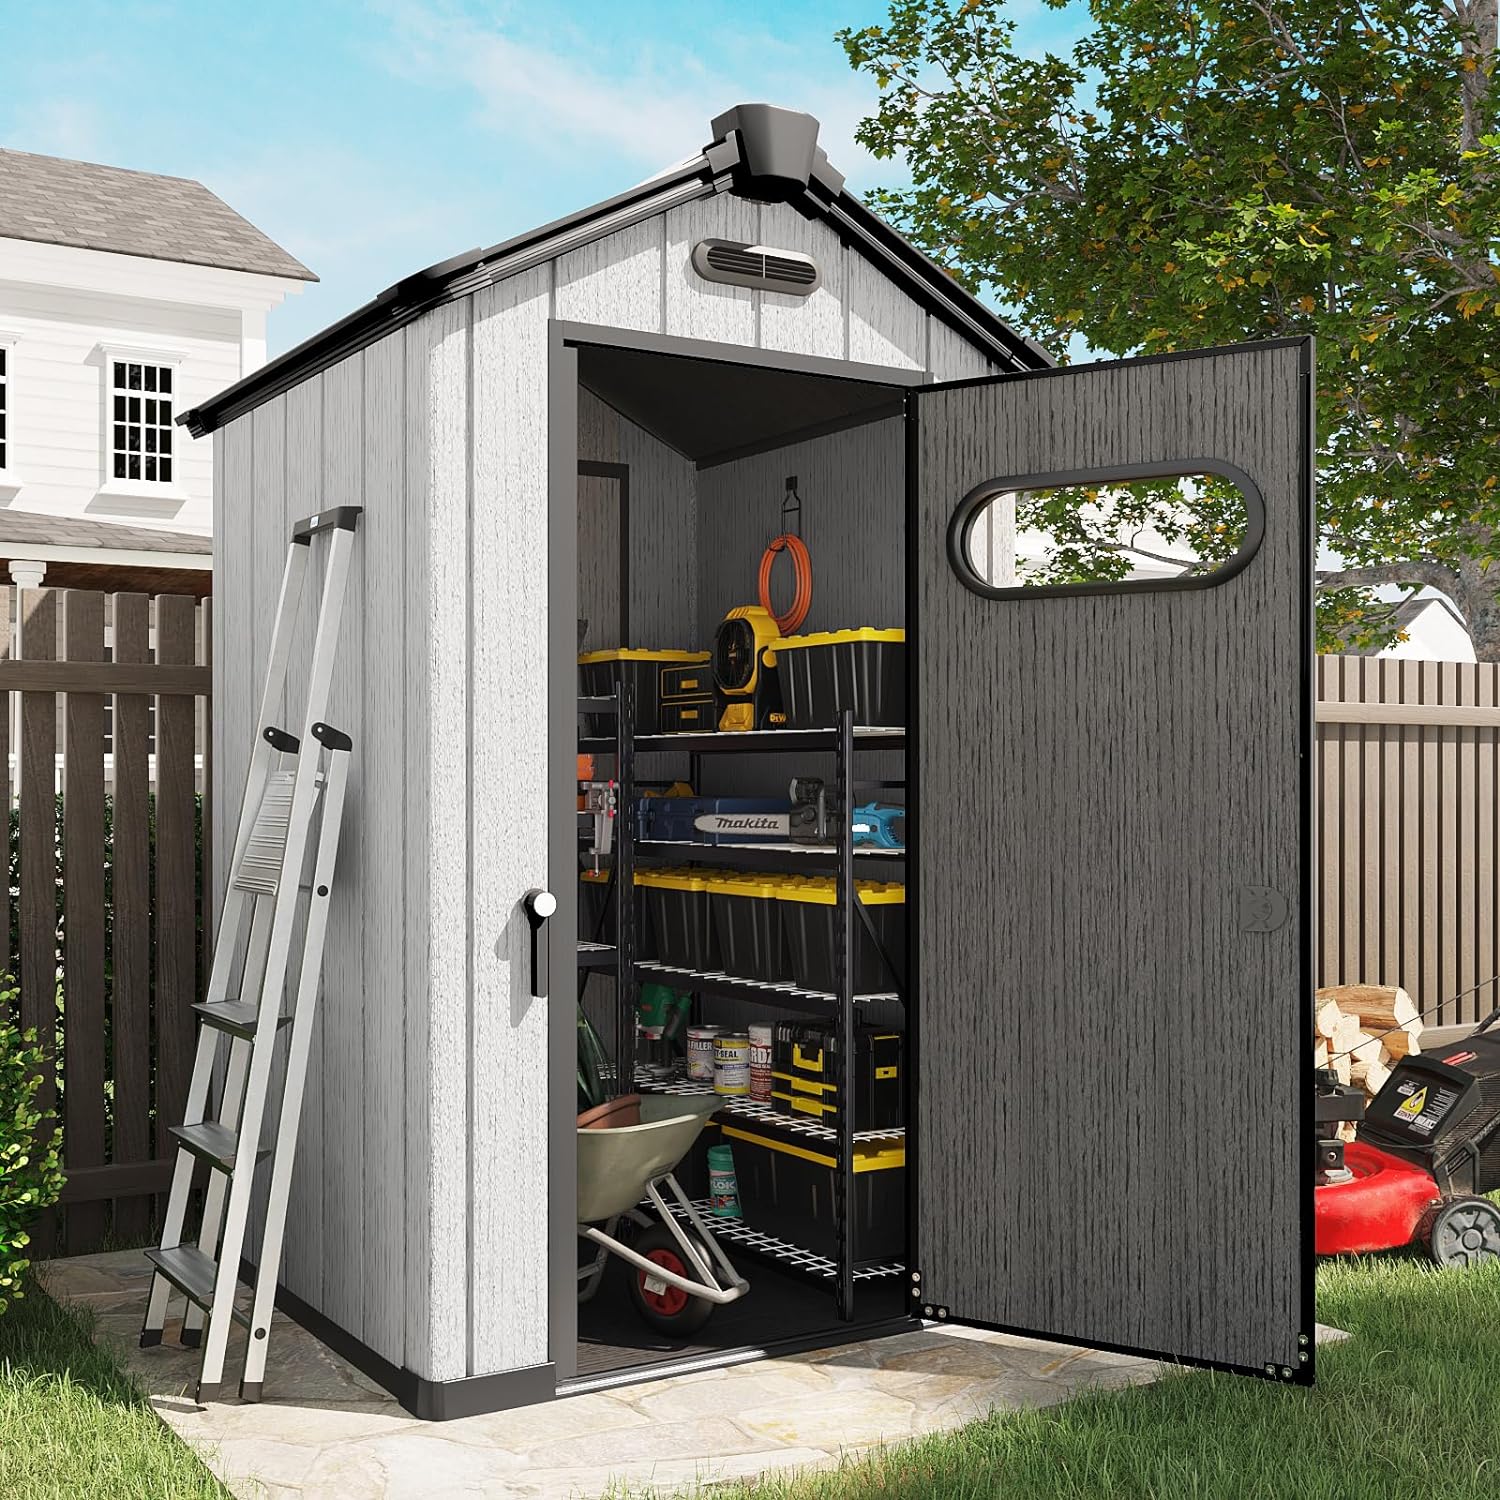 3.8' x 4.0' Resin Tool Shed, Polypropylene Storage Shed with Lockable Doors, Floor Included, Black and Grey